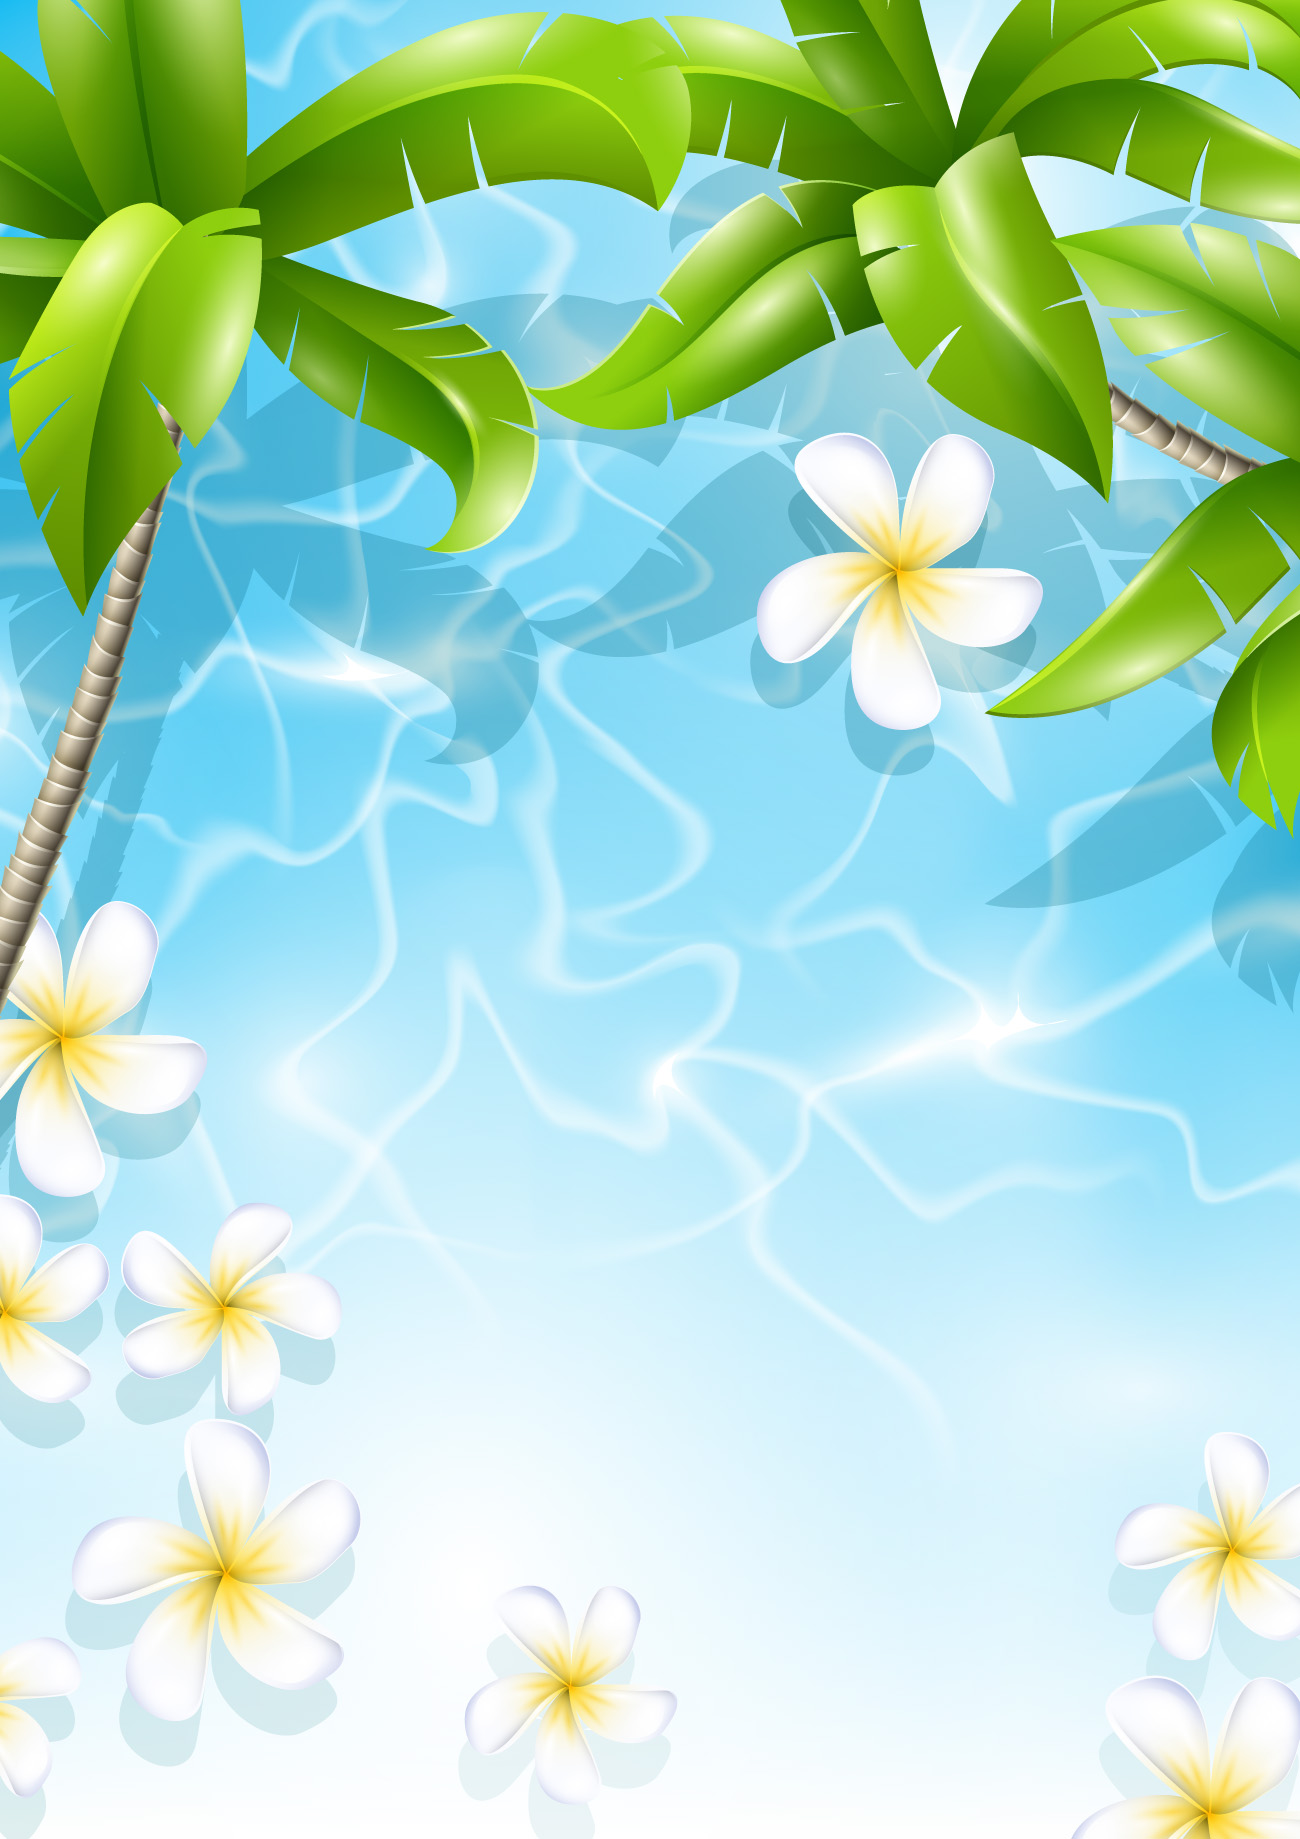 Beautiful Tropical Backgrounds vector 04